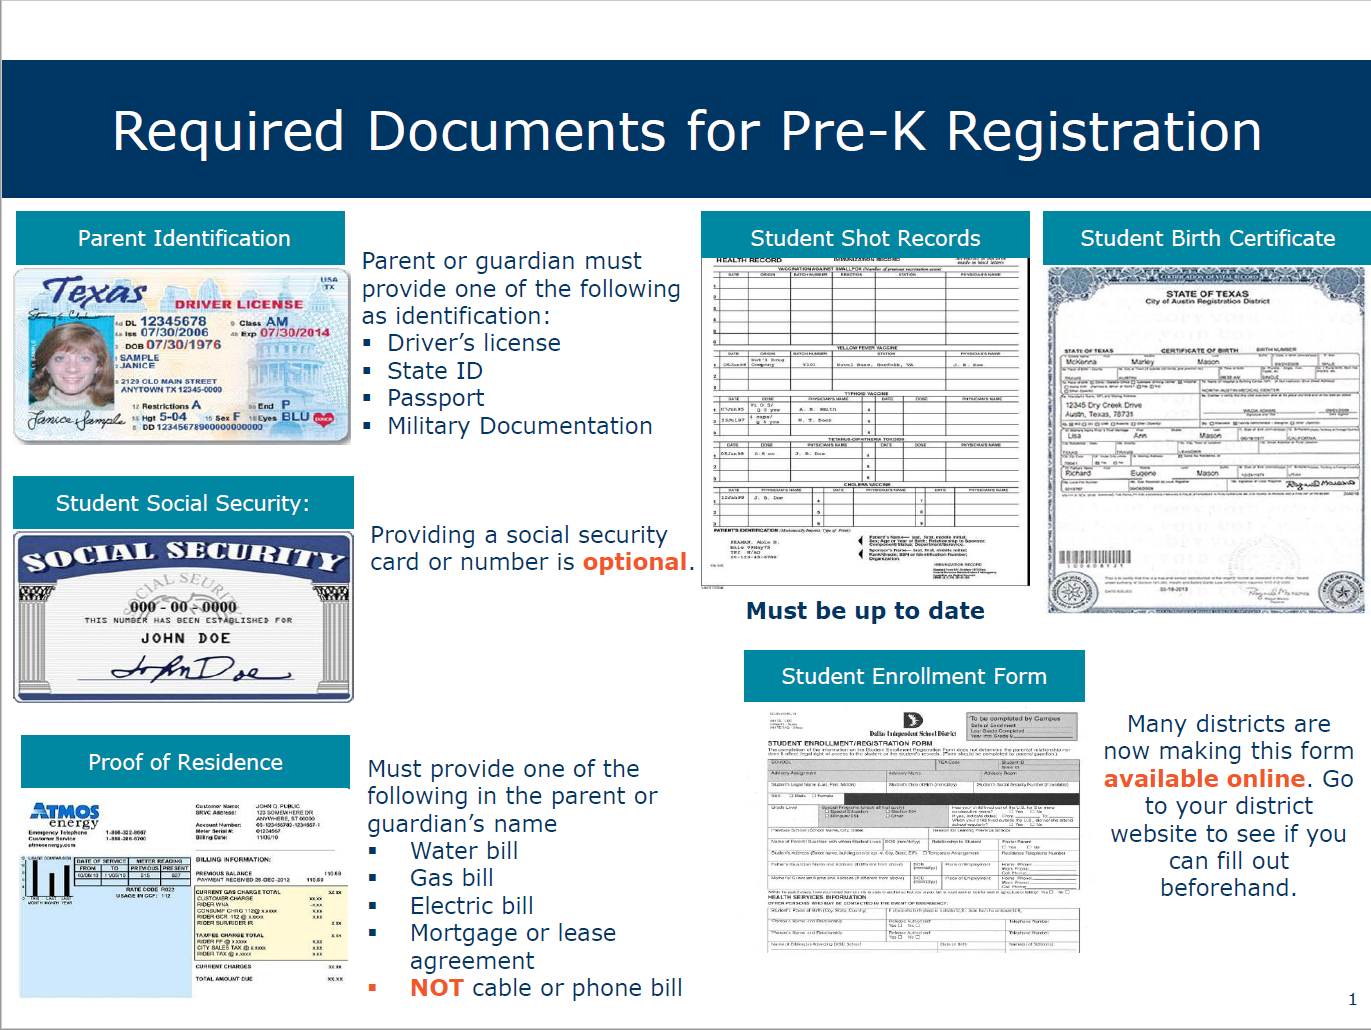 prek registration required documents page 1